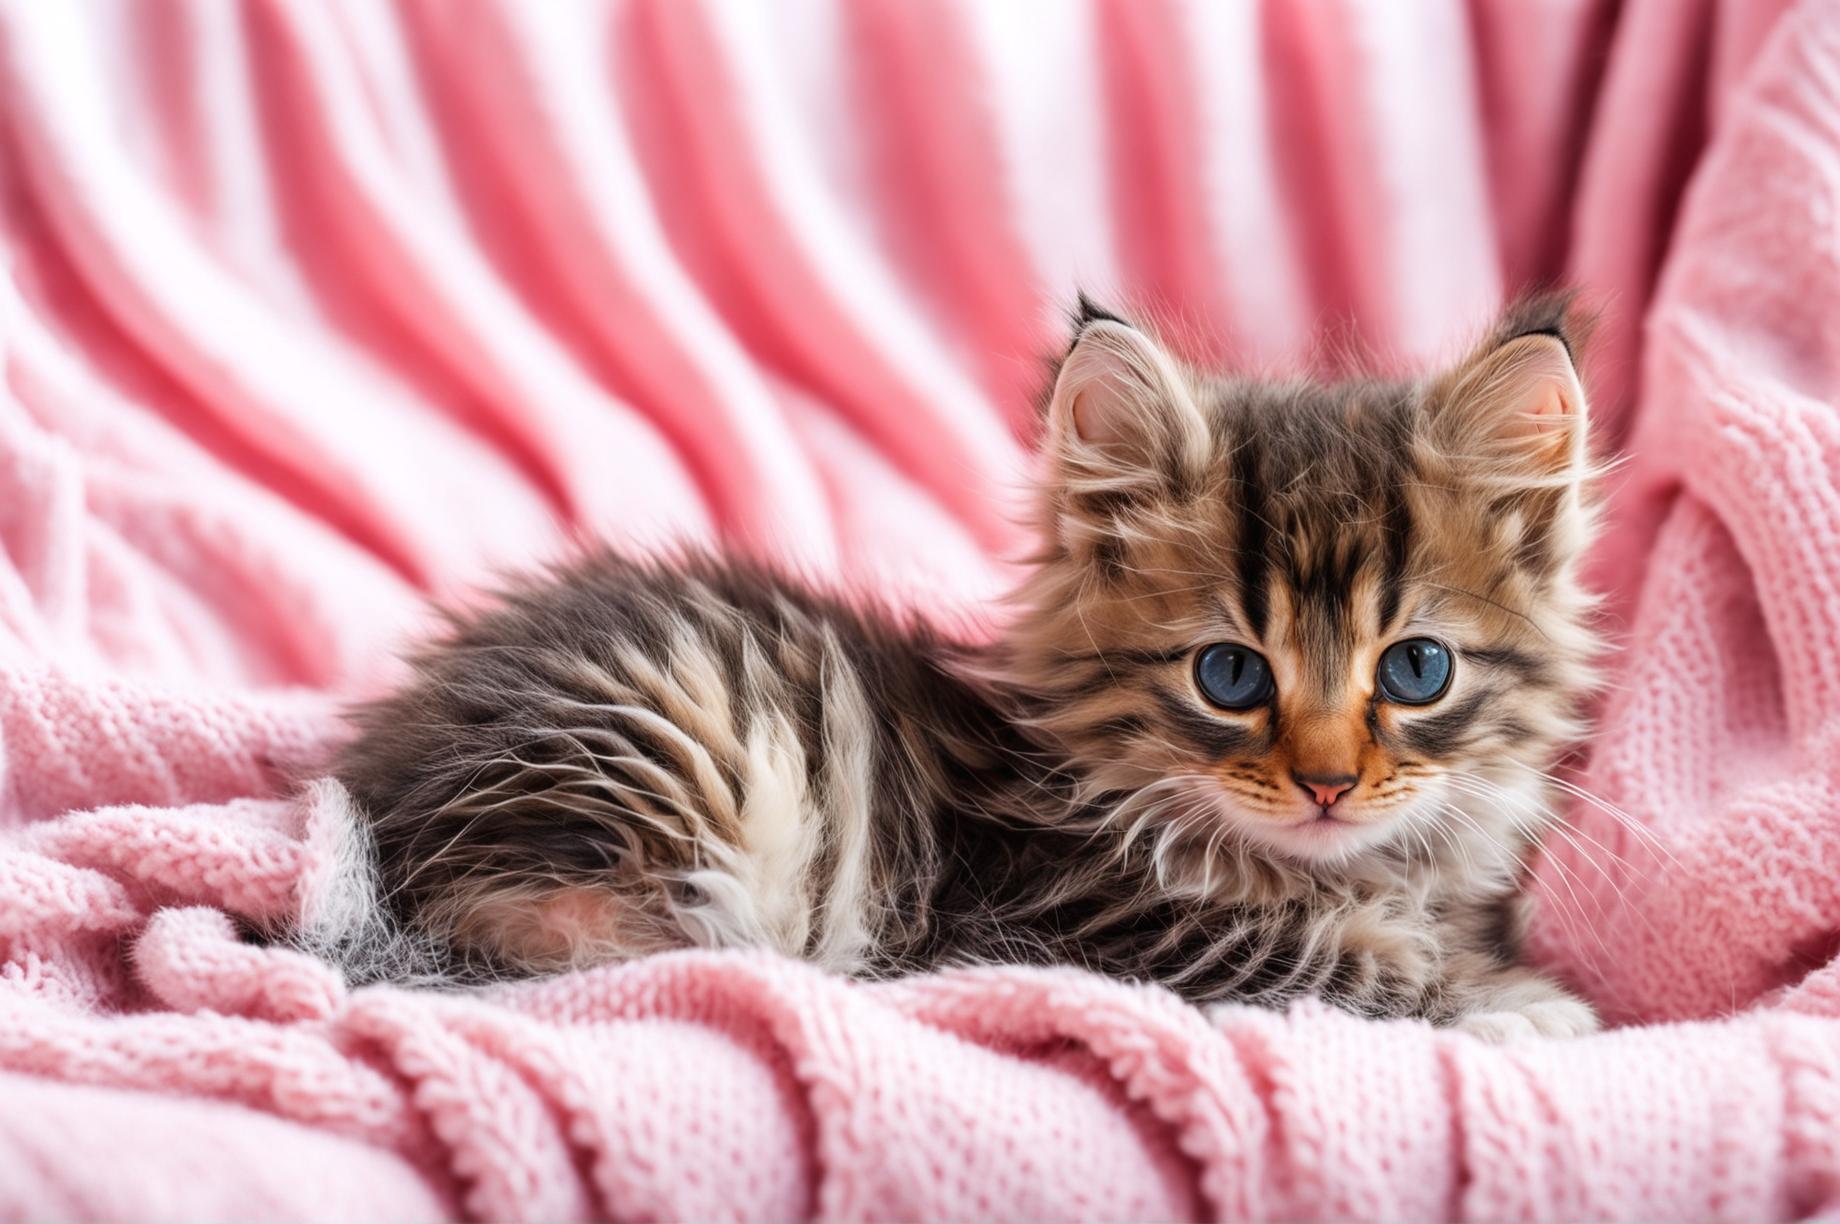 High-definition photograph of a fluffy kitten on a light pink blanket, designed for use as a wallpaper